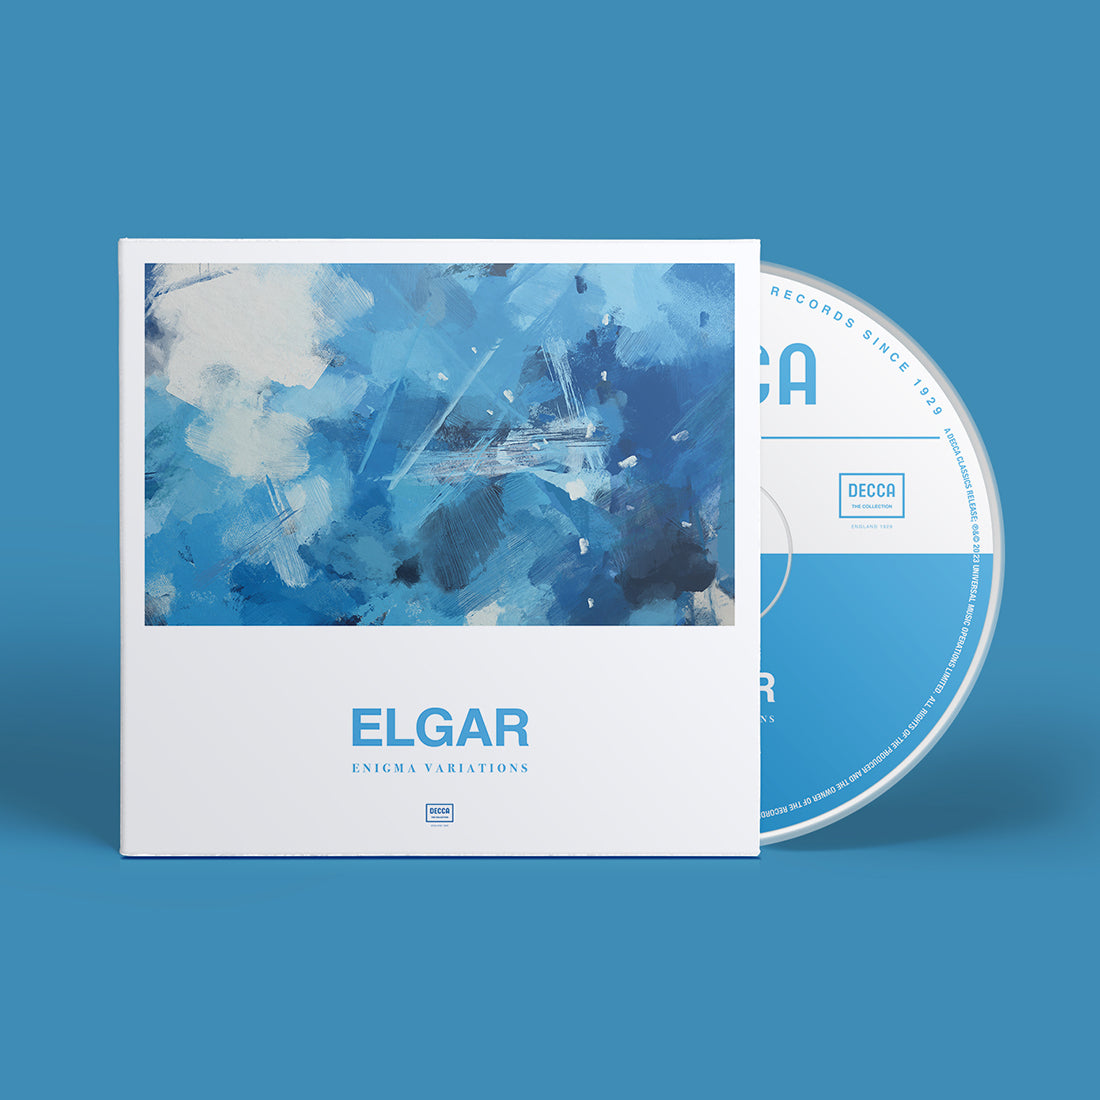 Edward Elgar - Enigma Variations (Decca – The Collection): CD